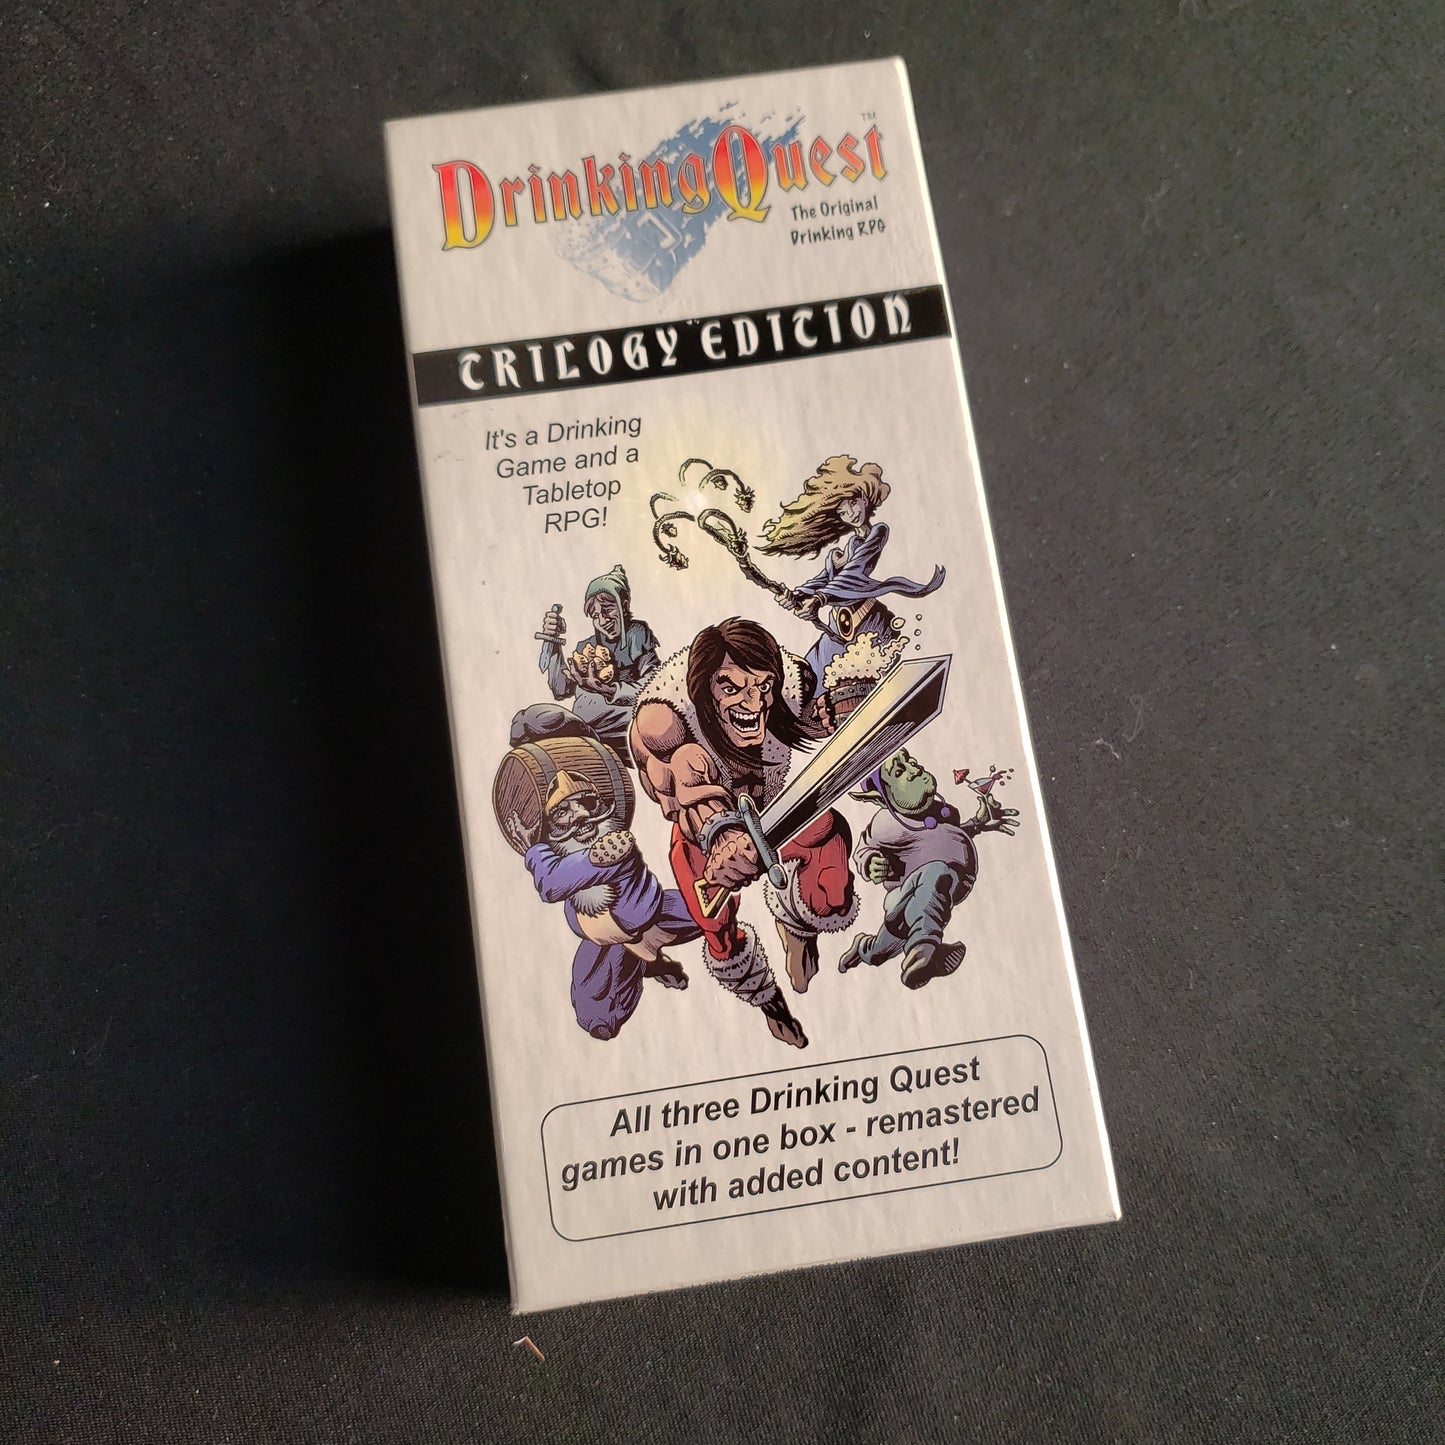 Image shows the front cover of the box of the Drinking Quest: Trilogy Edition card game